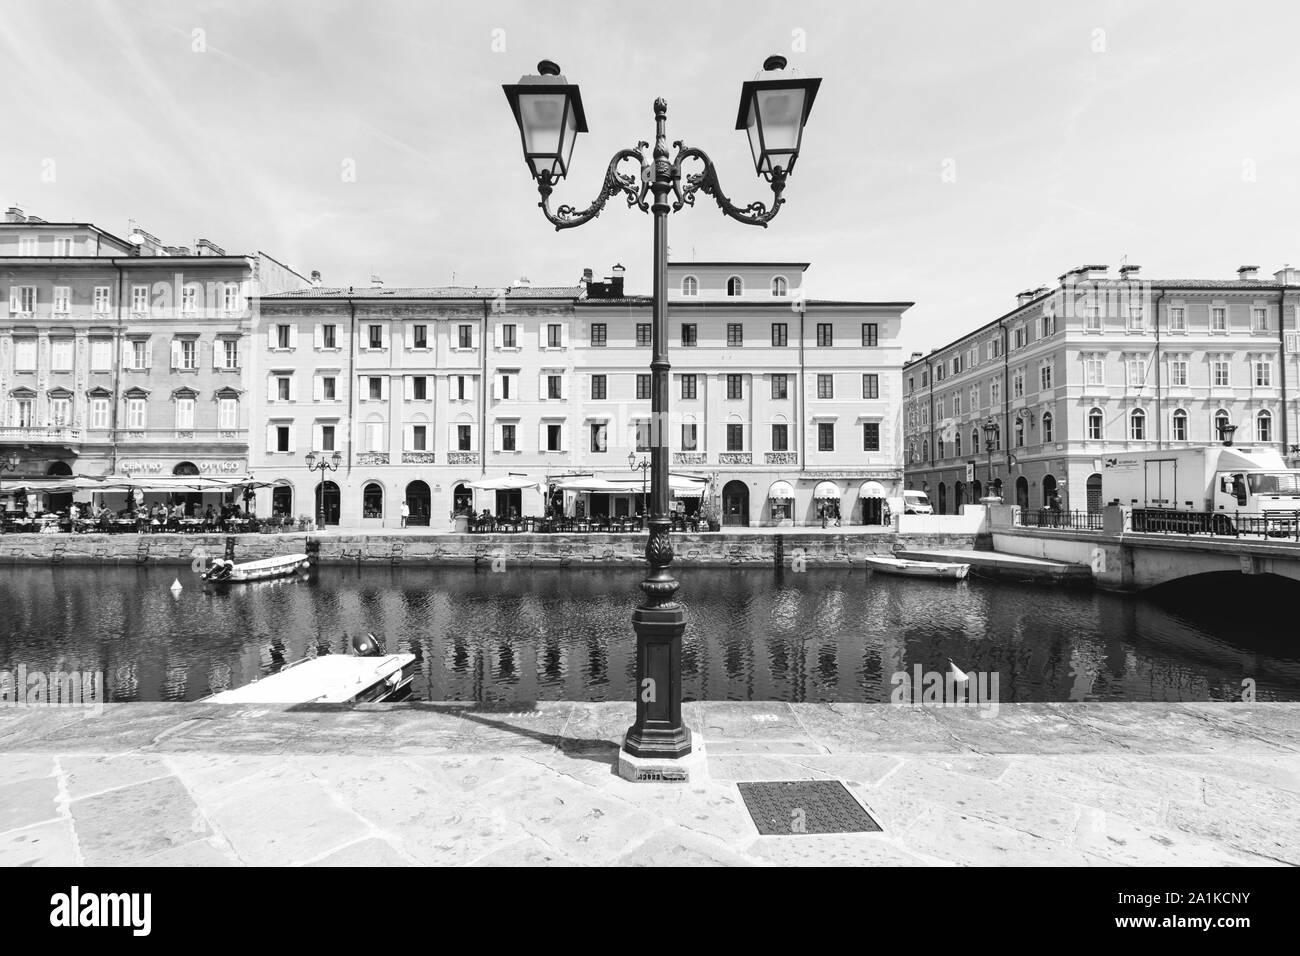 JULY 22, 2019 - TRIESTE, ITALY - Canal Grande, the Grand Canal, is a navigable canal that crosses the historical center of Trieste and reaches the sea Stock Photo